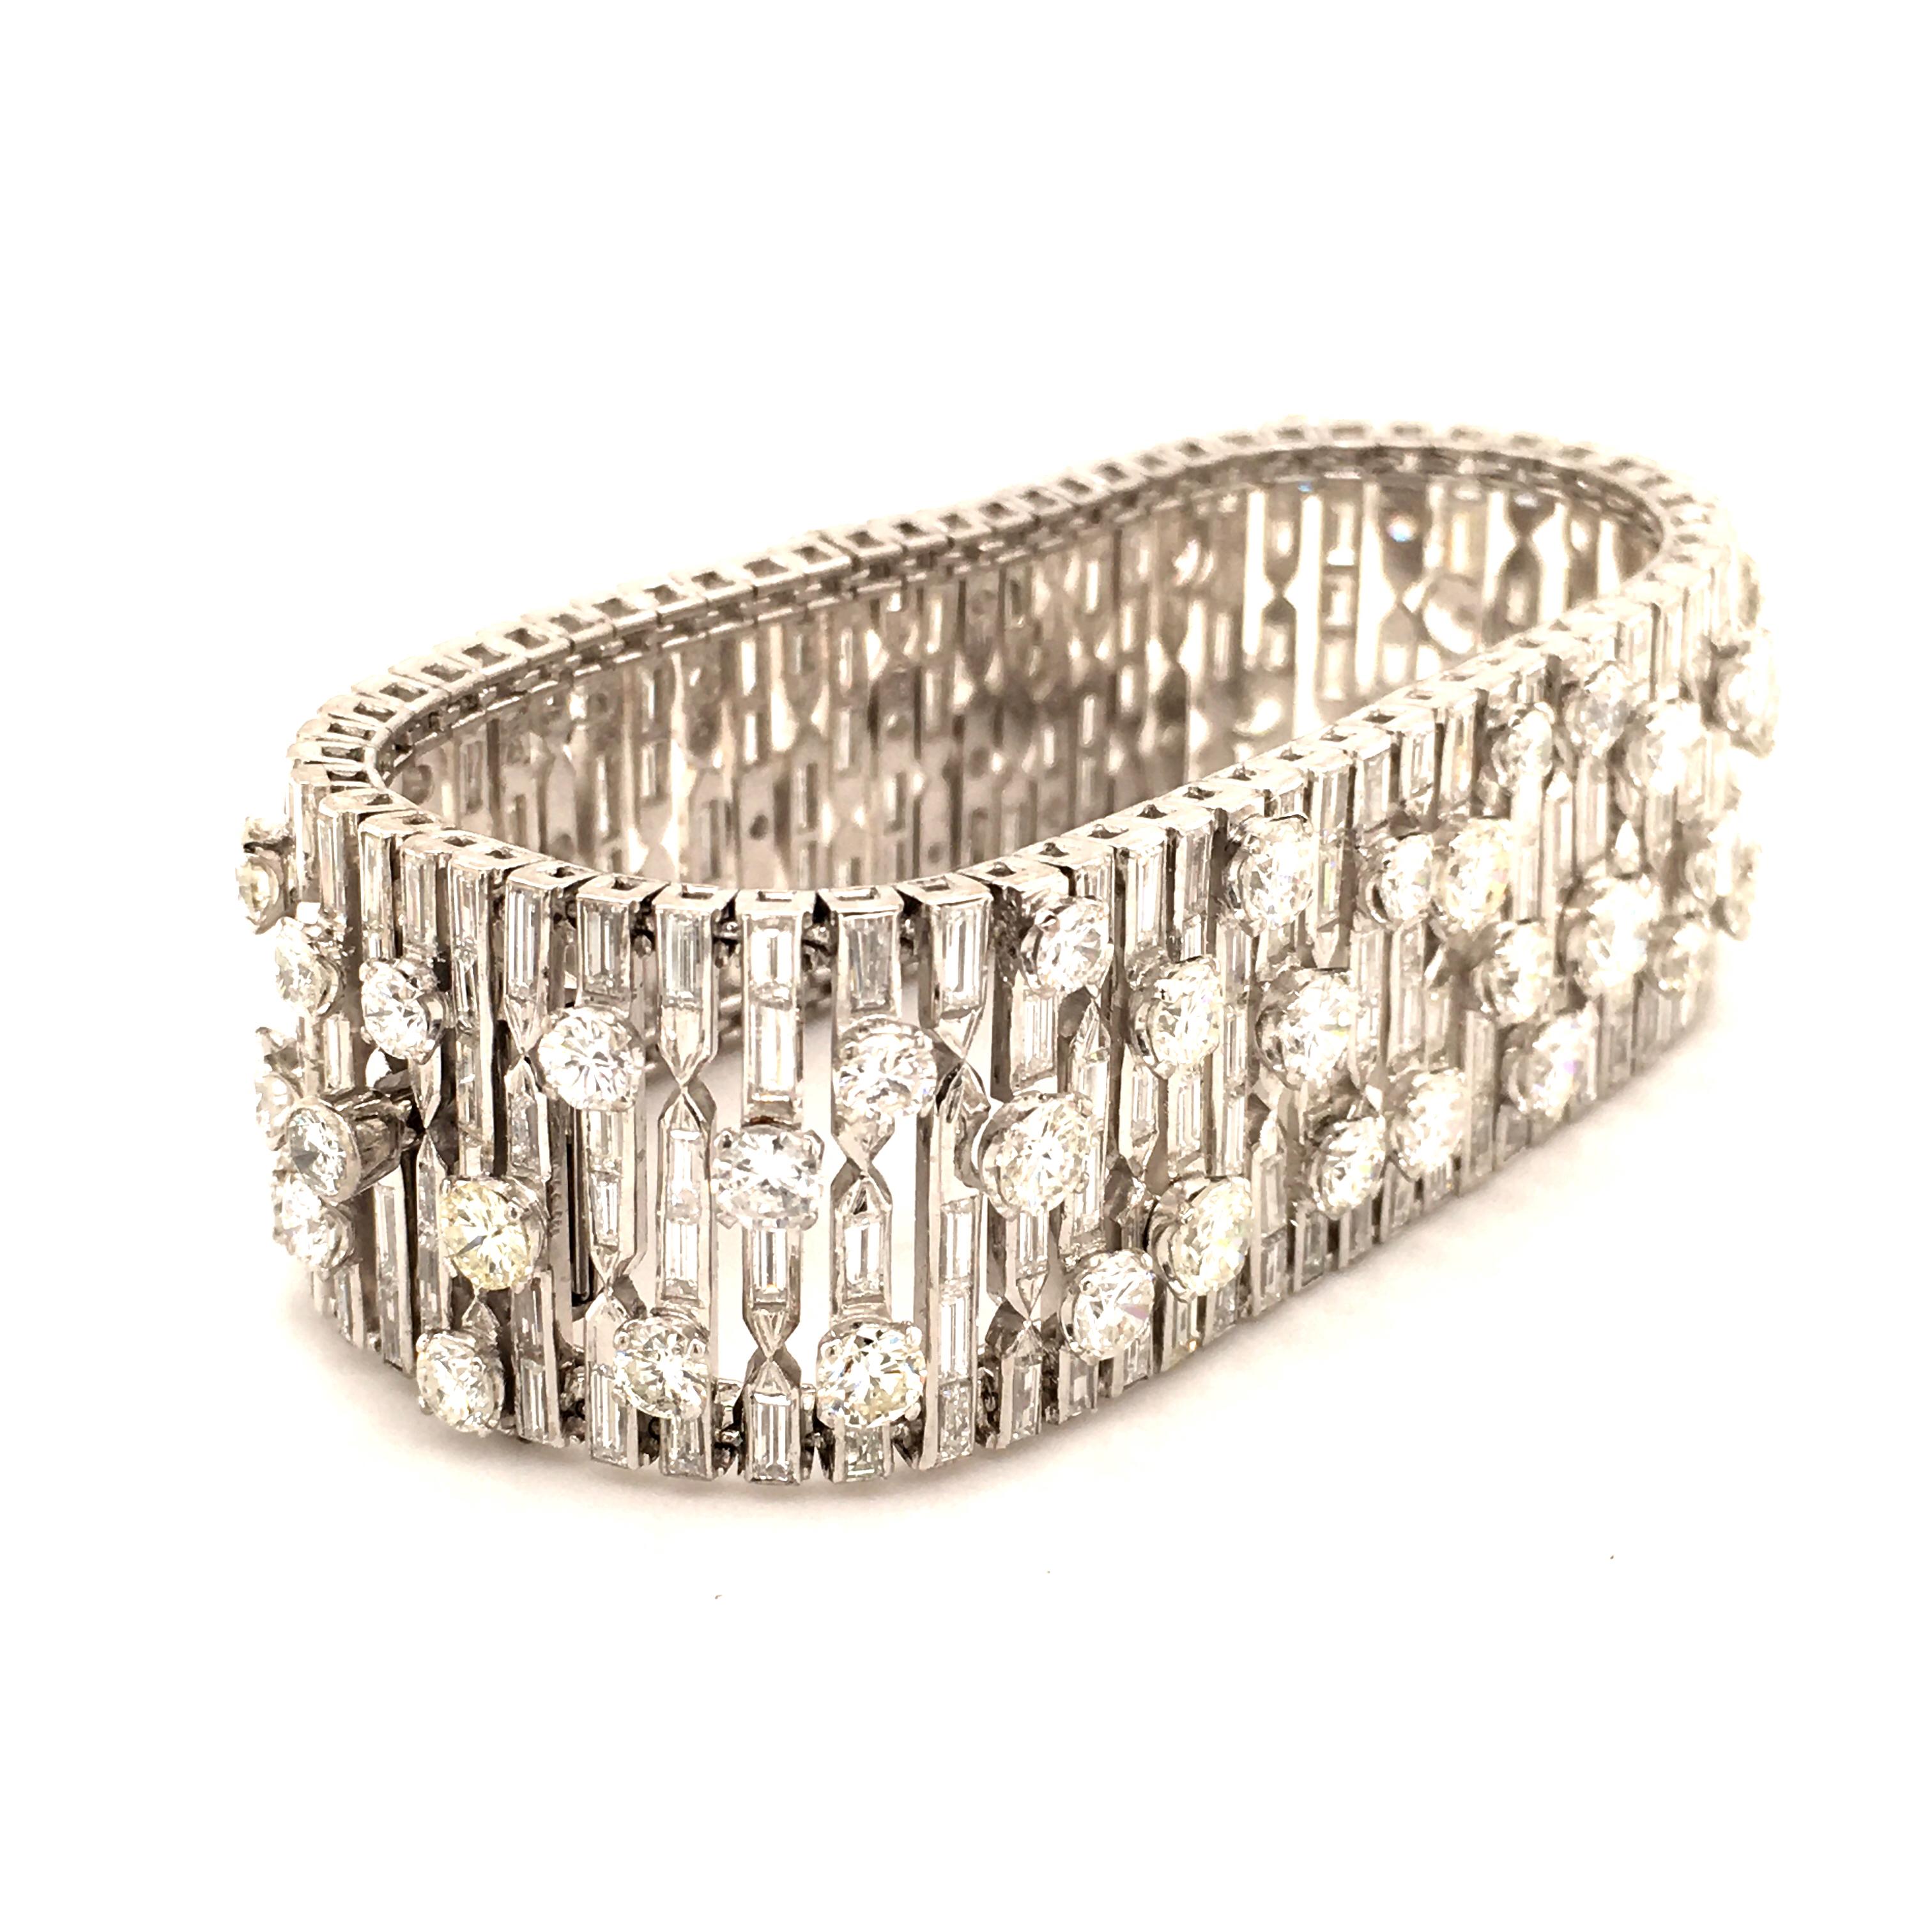 Unique bracelet with diamonds in white gold 14k. Very cool design completed with 229 baguette cut and 70 brilliant cut diamonds totaling 38.25 ct in weight. The round diamonds vary from 0.15 to 0.45 ct. All diamonds are in G/H-vs quality. Box clasp